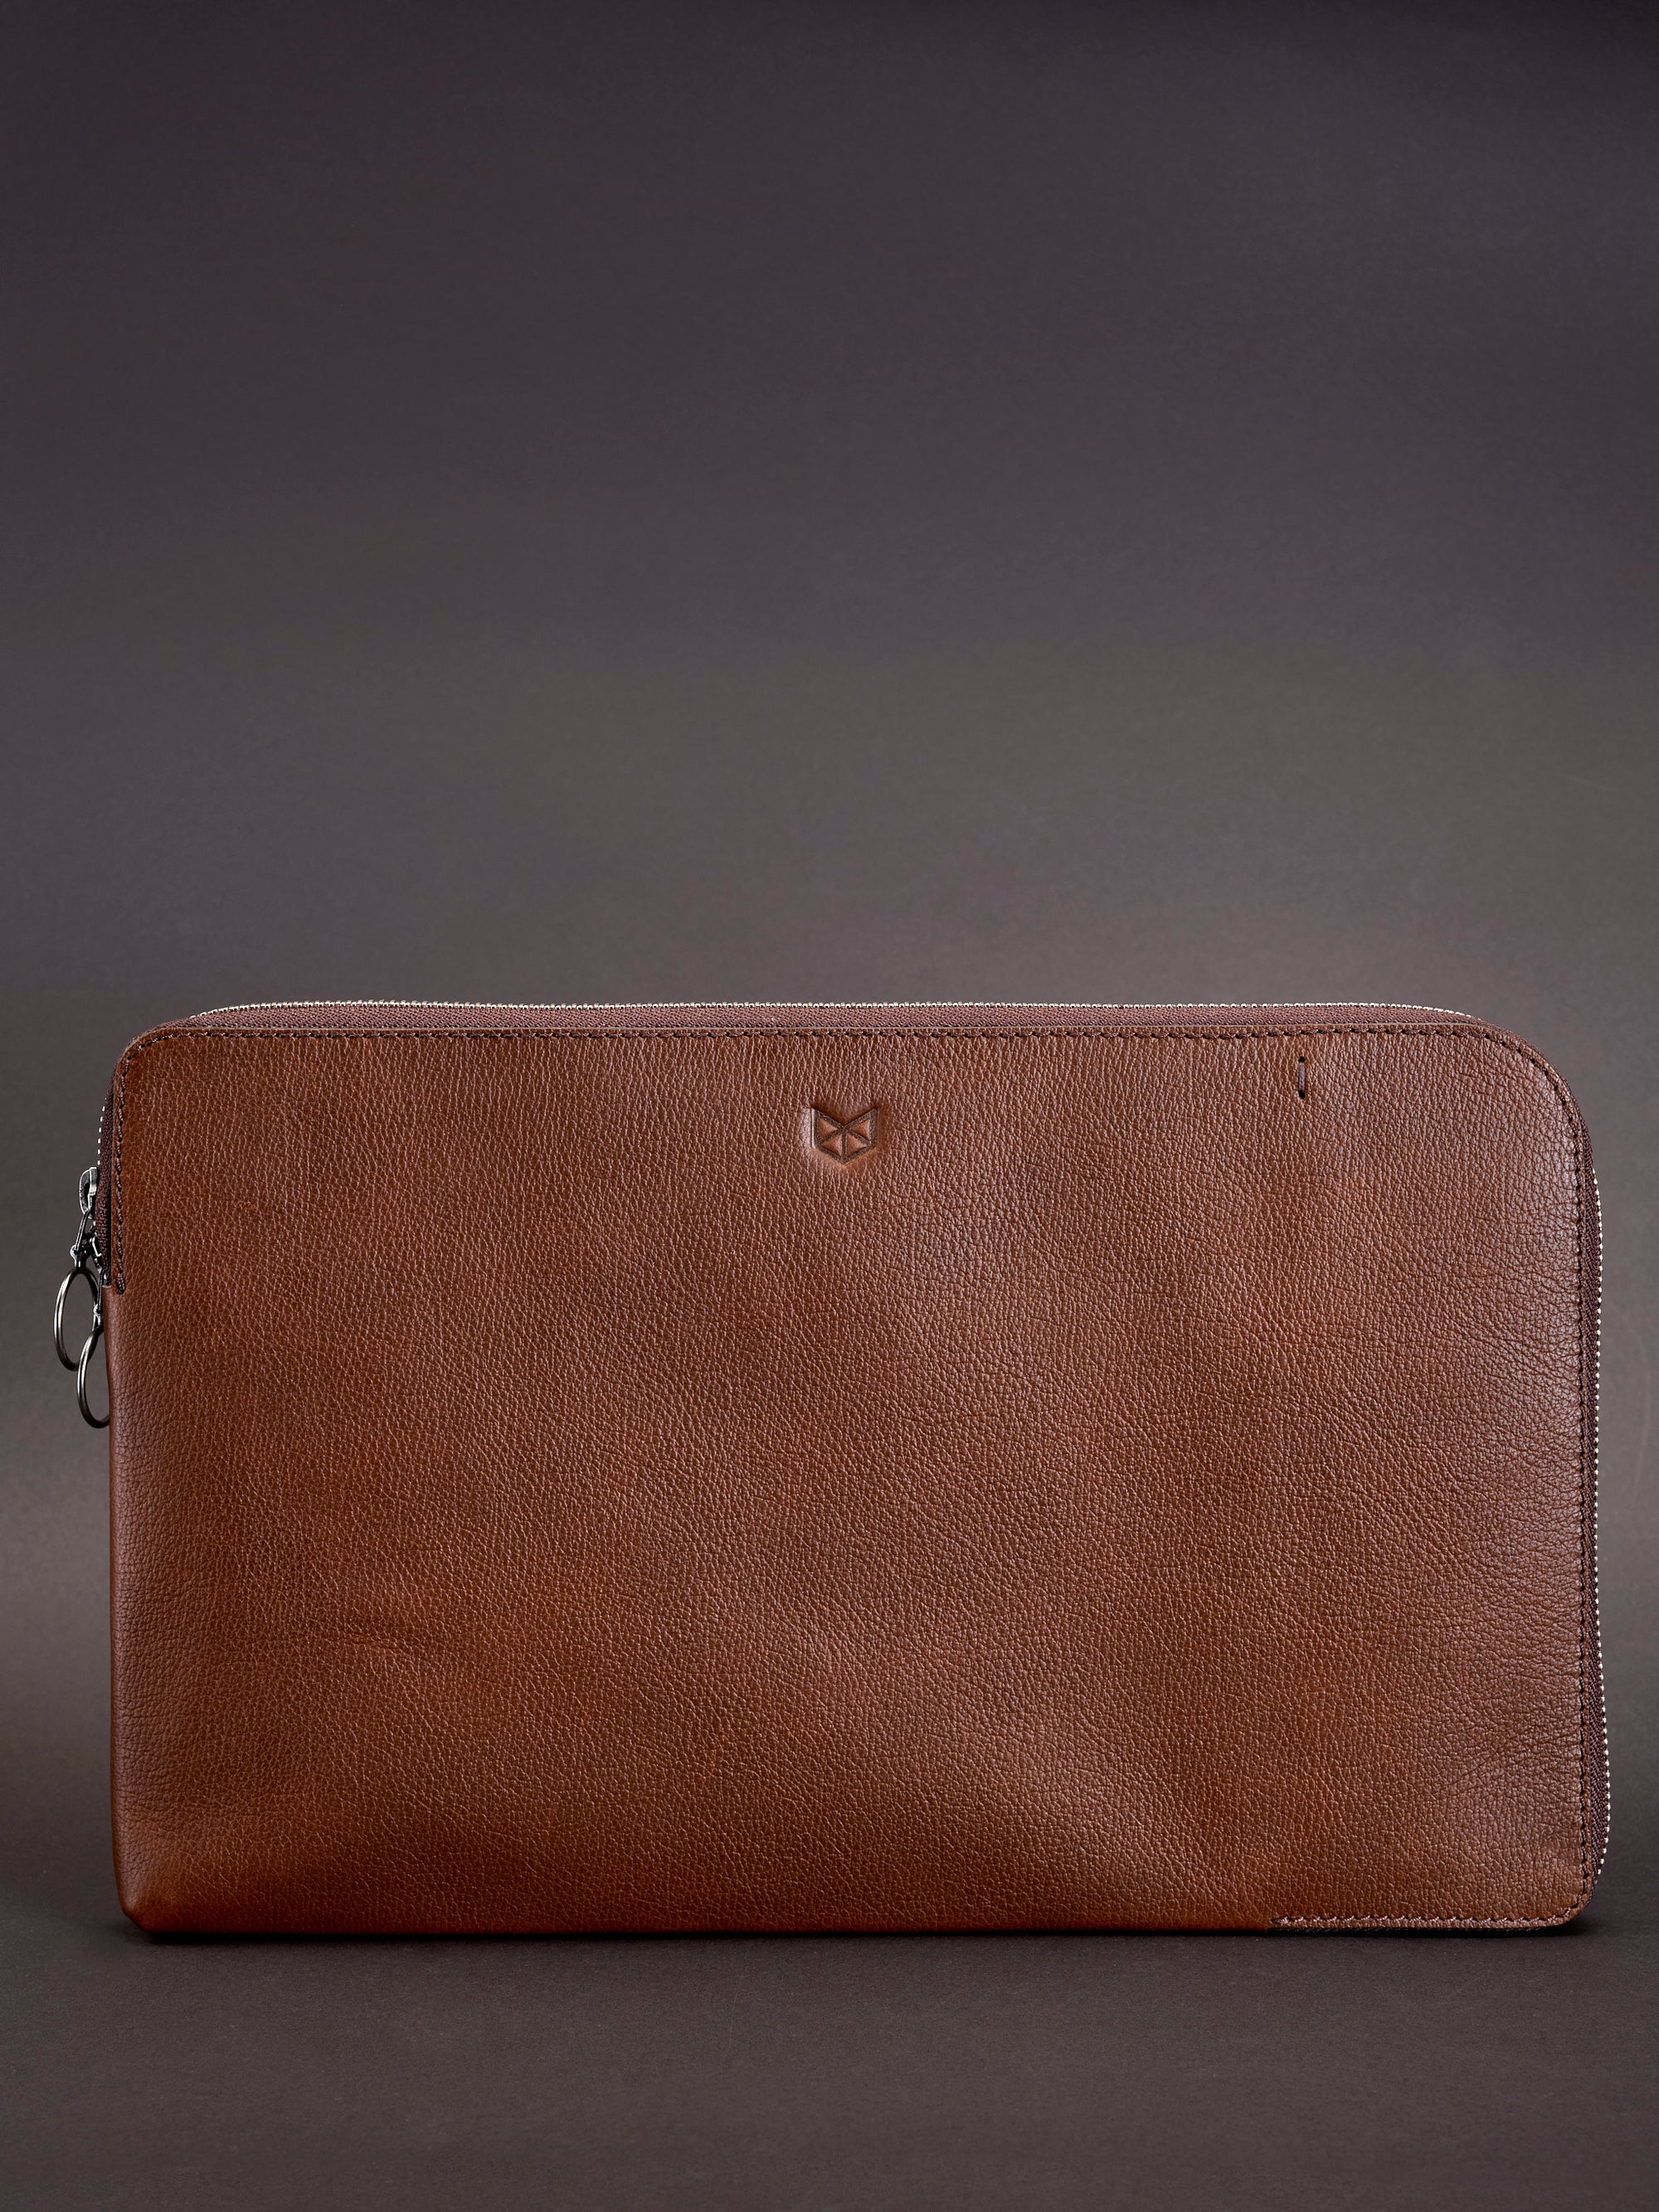 Front view. Draftsman 6 iPad Case Brown, iPad Pro 11-inch, iPad Pro 12.9-inch, M1 Chip by Capra Leather